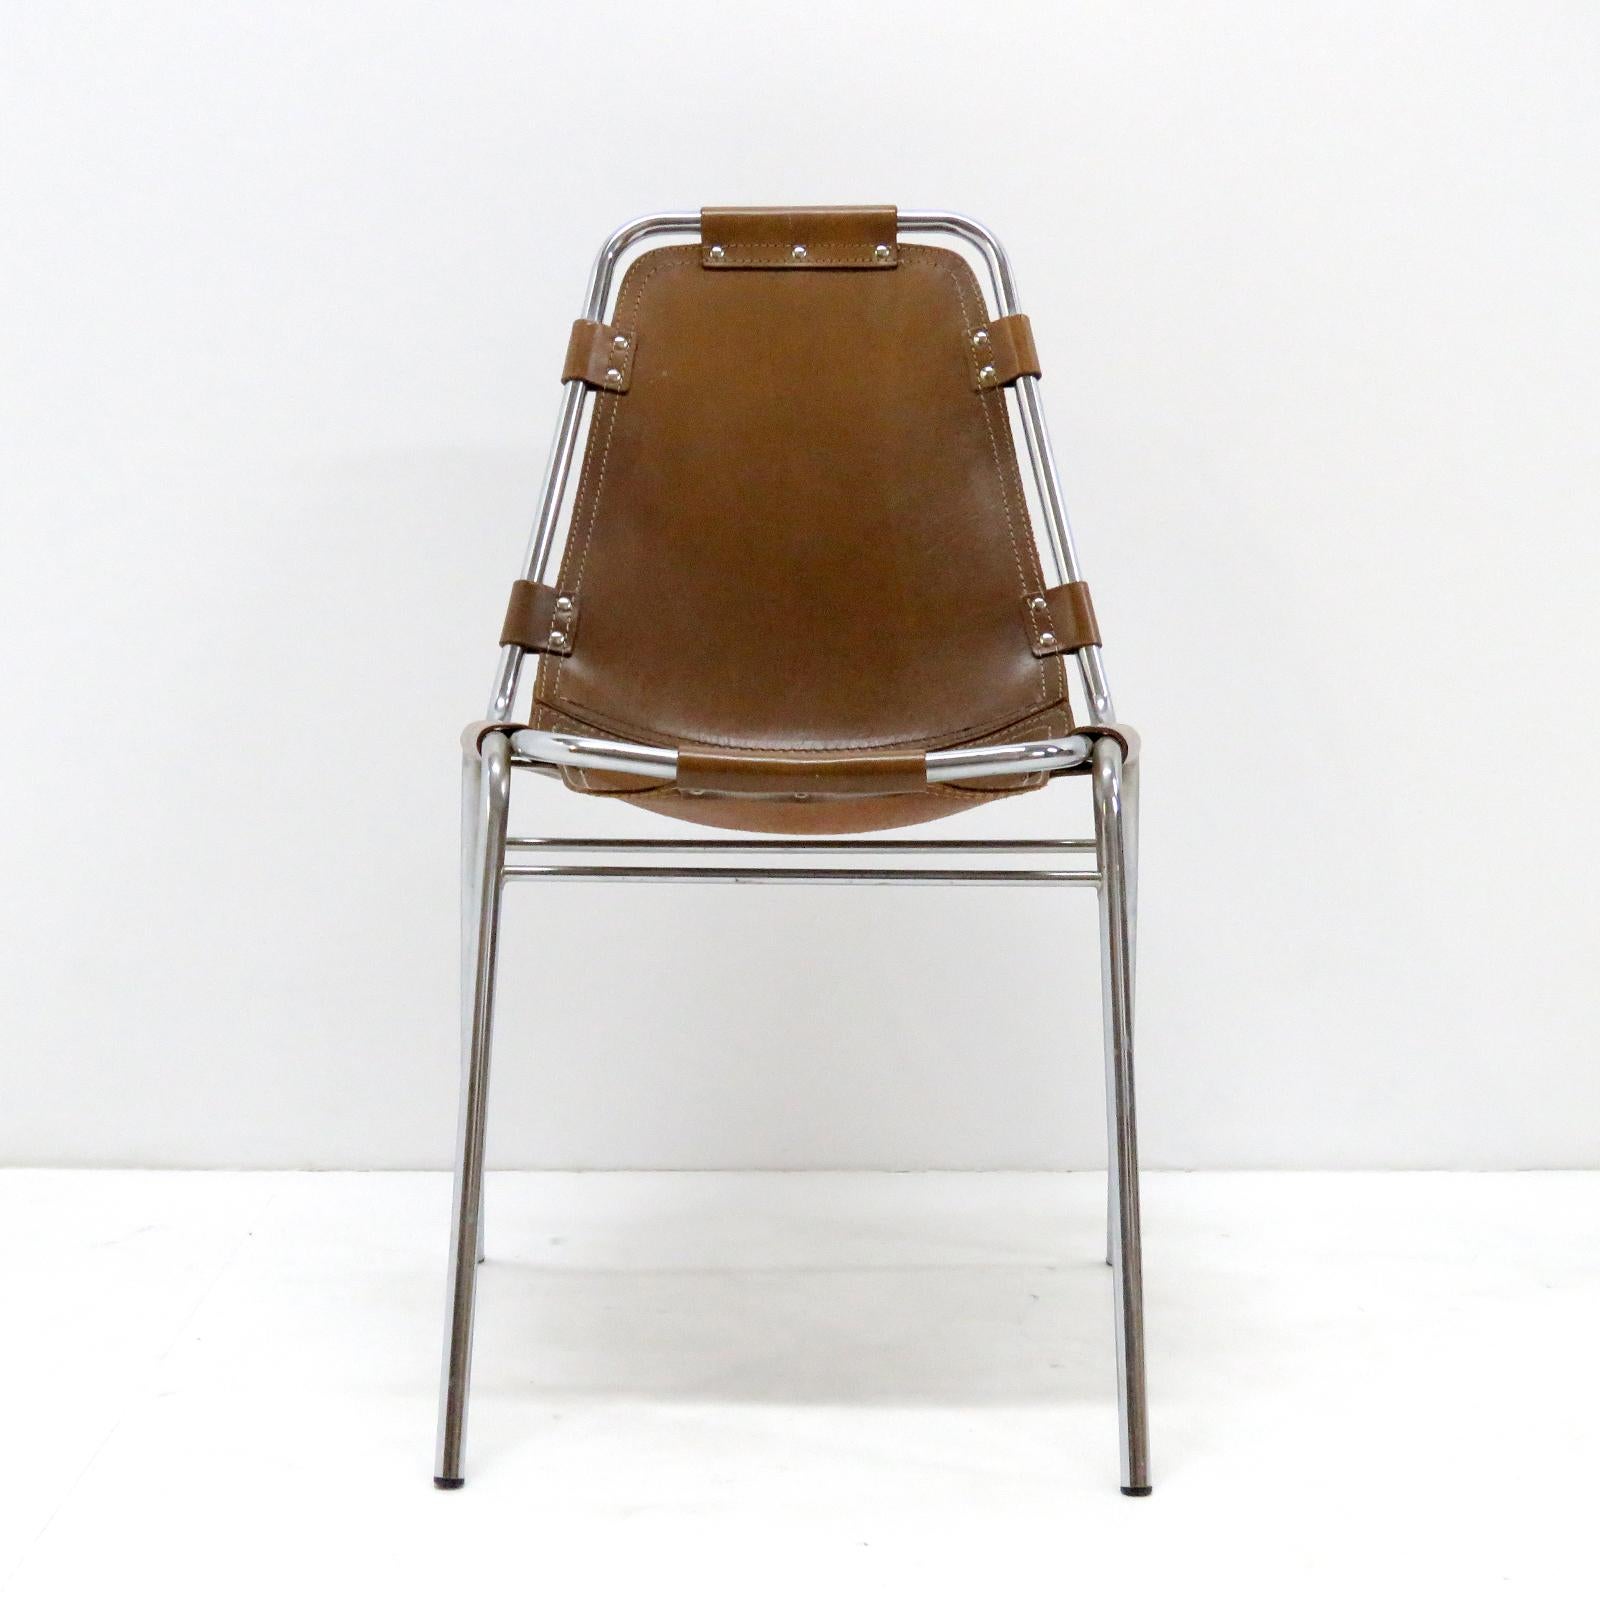 Iconic leather and metal side chair selected by Charlotte Perriand for the Ski resort Les Arcs in 1960, with chrome tubular frame in great condition and high quality thick leather seat with a fantastic patina to the leather.